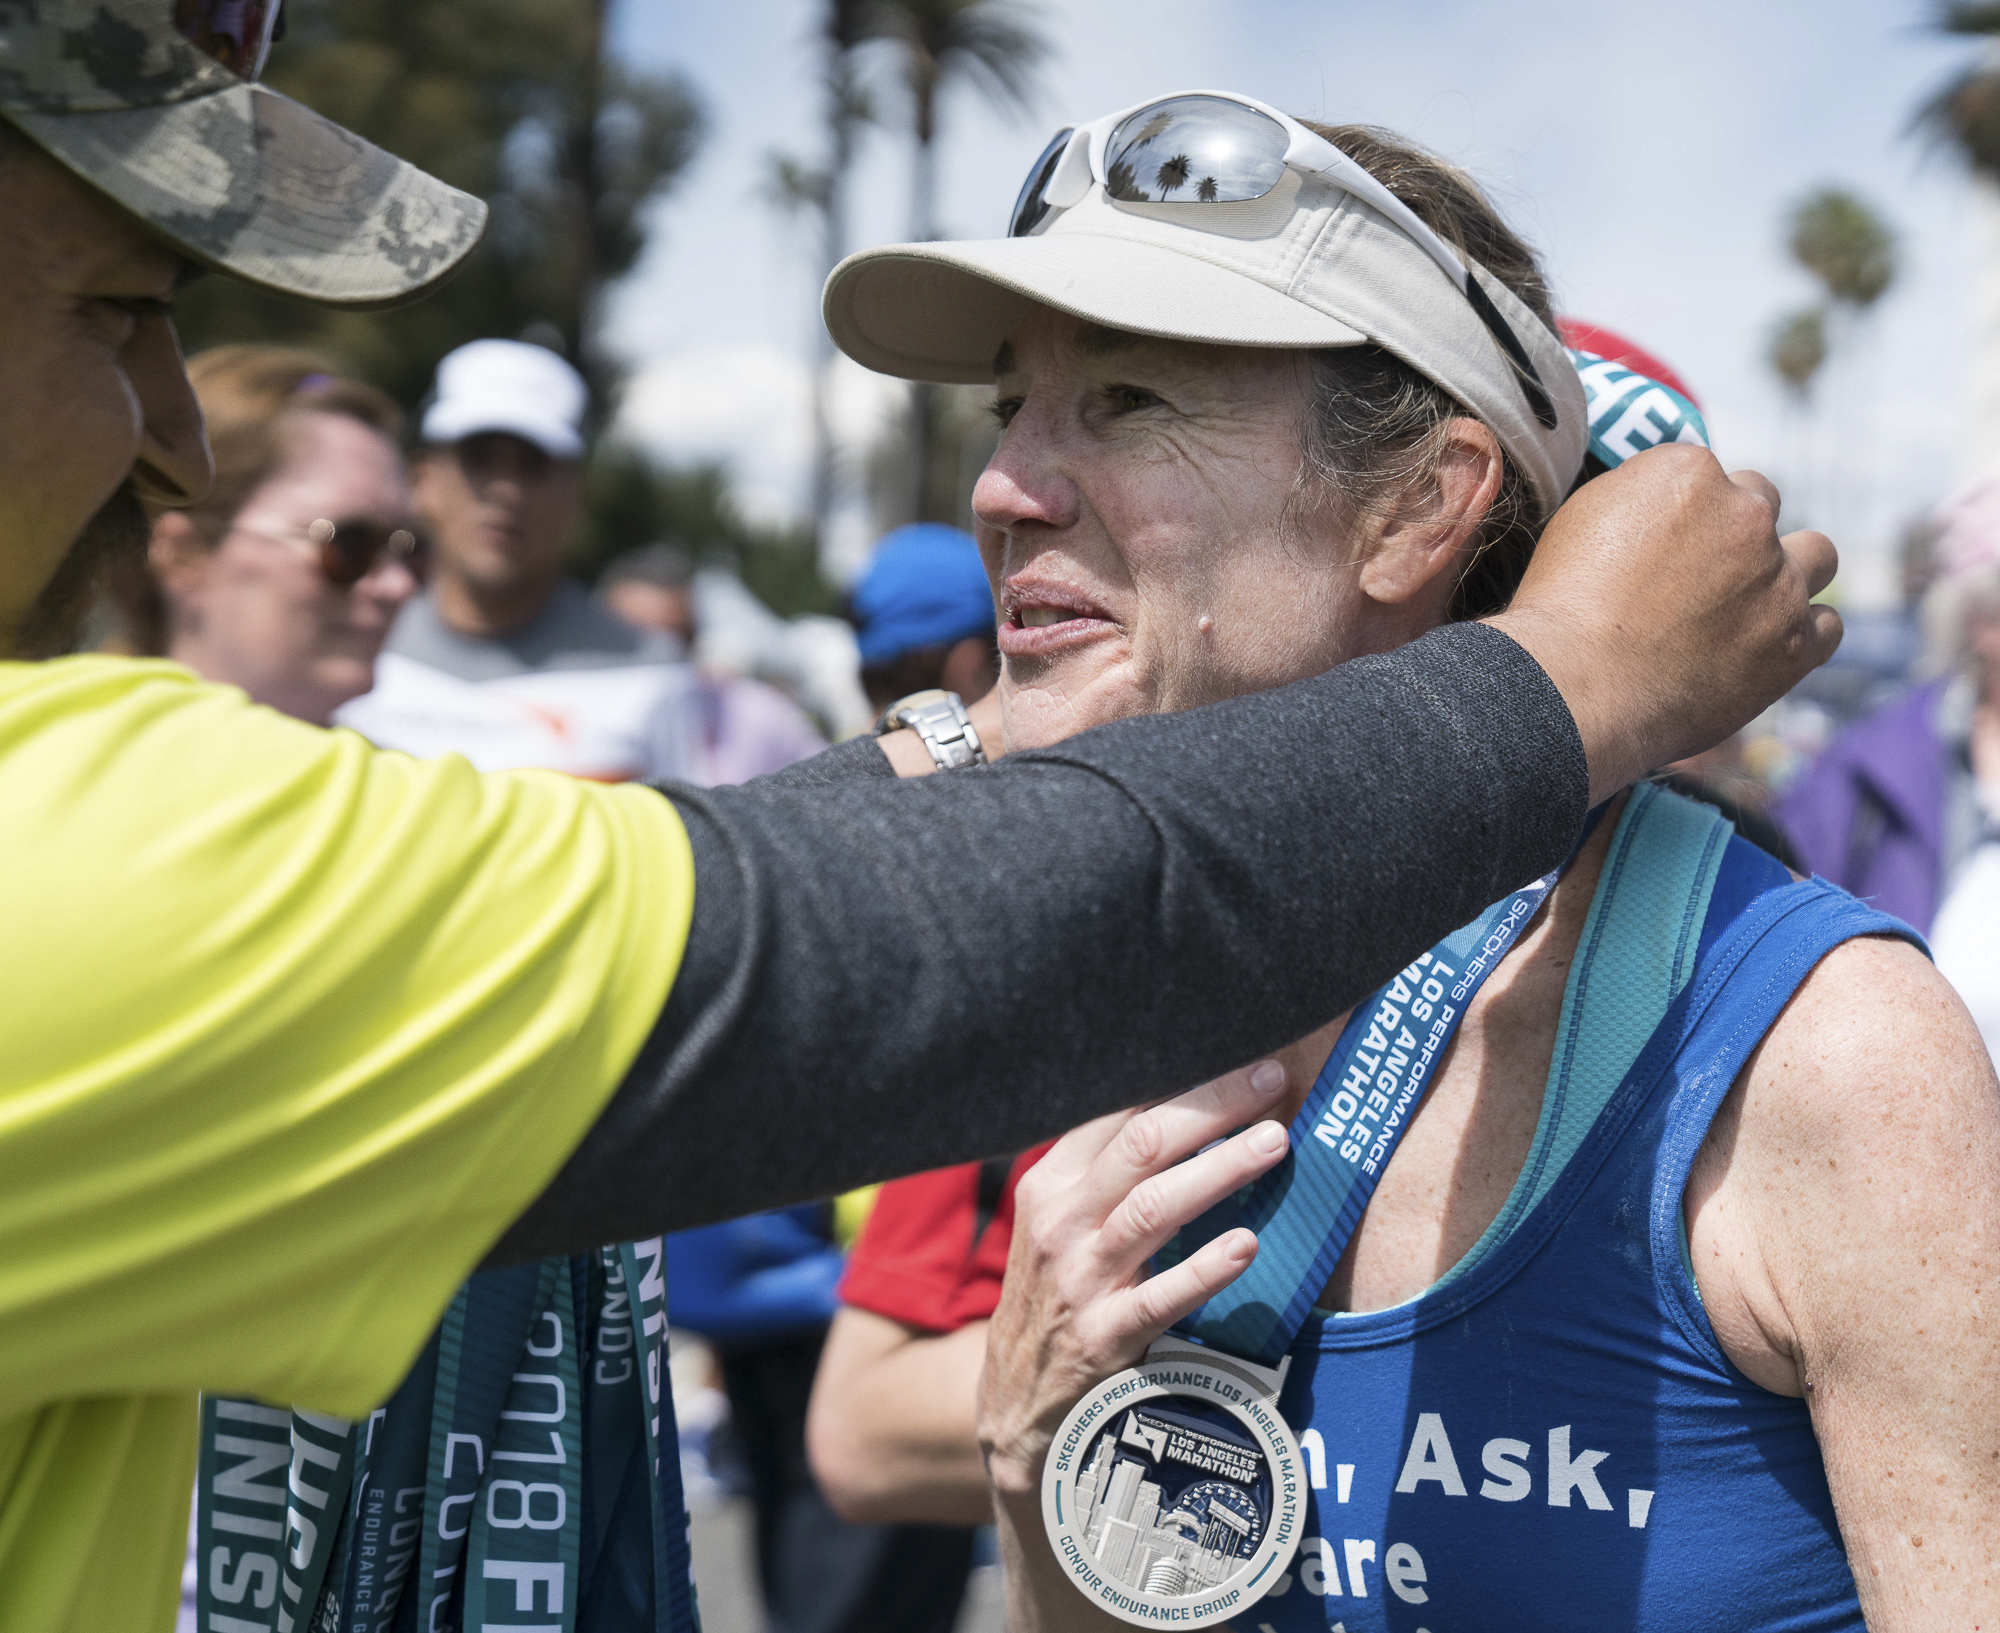  Kathy Welch, who ran the Los Angeles Marathon in memory of her son, SMC student David Sliff, receives her medal in Santa Monica, California on Sunday, March 18, 2018. This was Kathy's 13th marathon, but the first she ran in memory of her son, who di